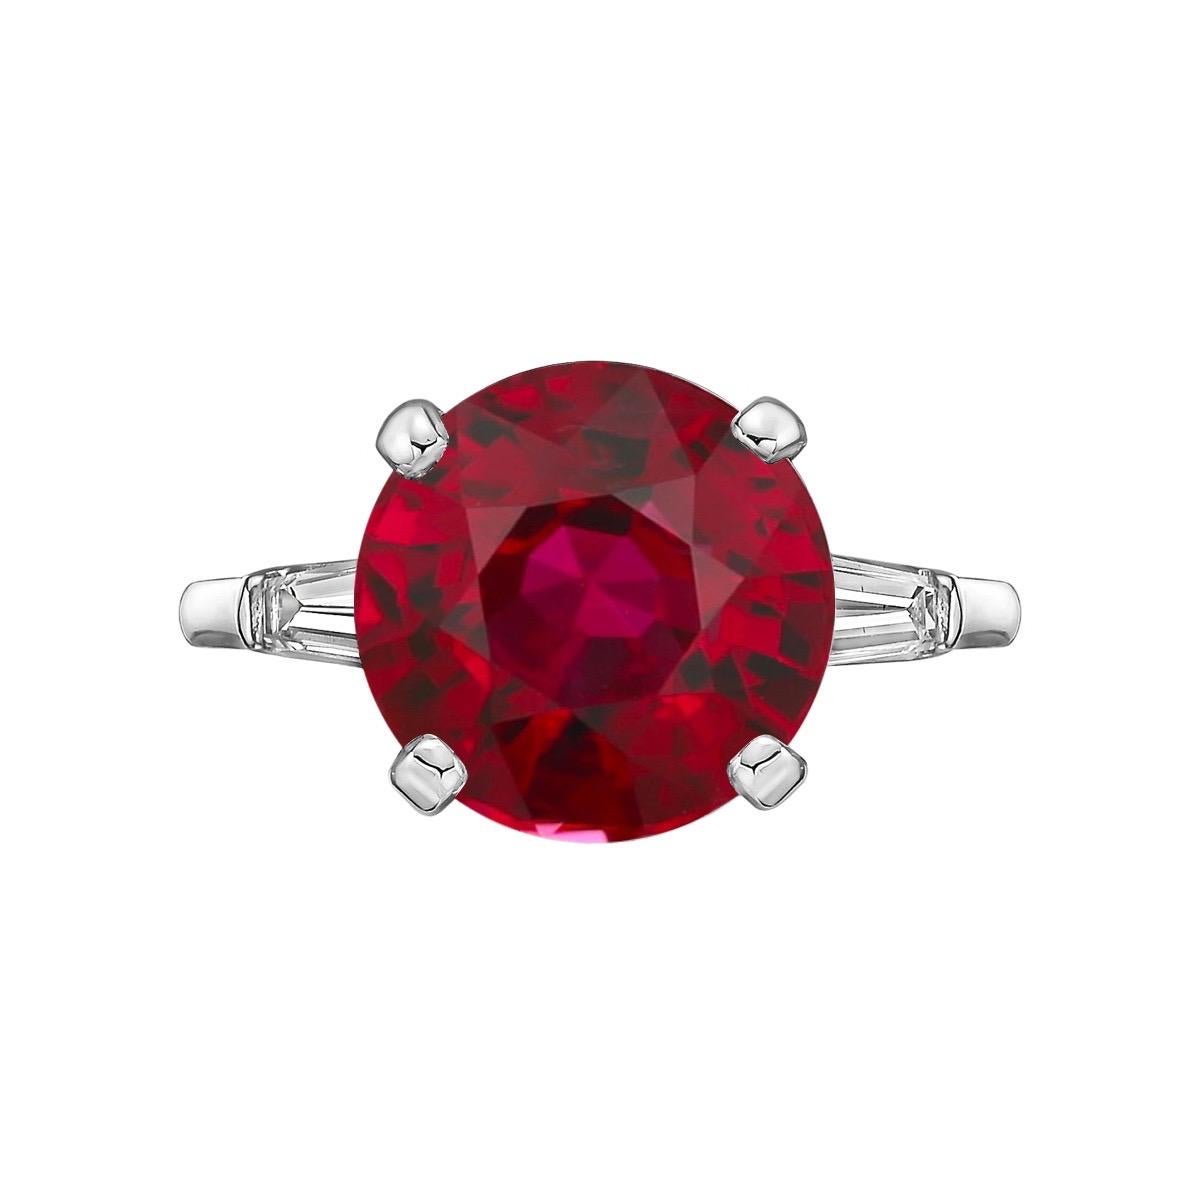 From The Vault At Emilio Jewelry New York,

Main stone: The nicest ruby you will ever see! Its a dream come true. 2.50 carat mozambique pigeons blood ruby of excellent color, clarity, and vibrant. 
Setting:Platinum ring with .50ct of side tapered